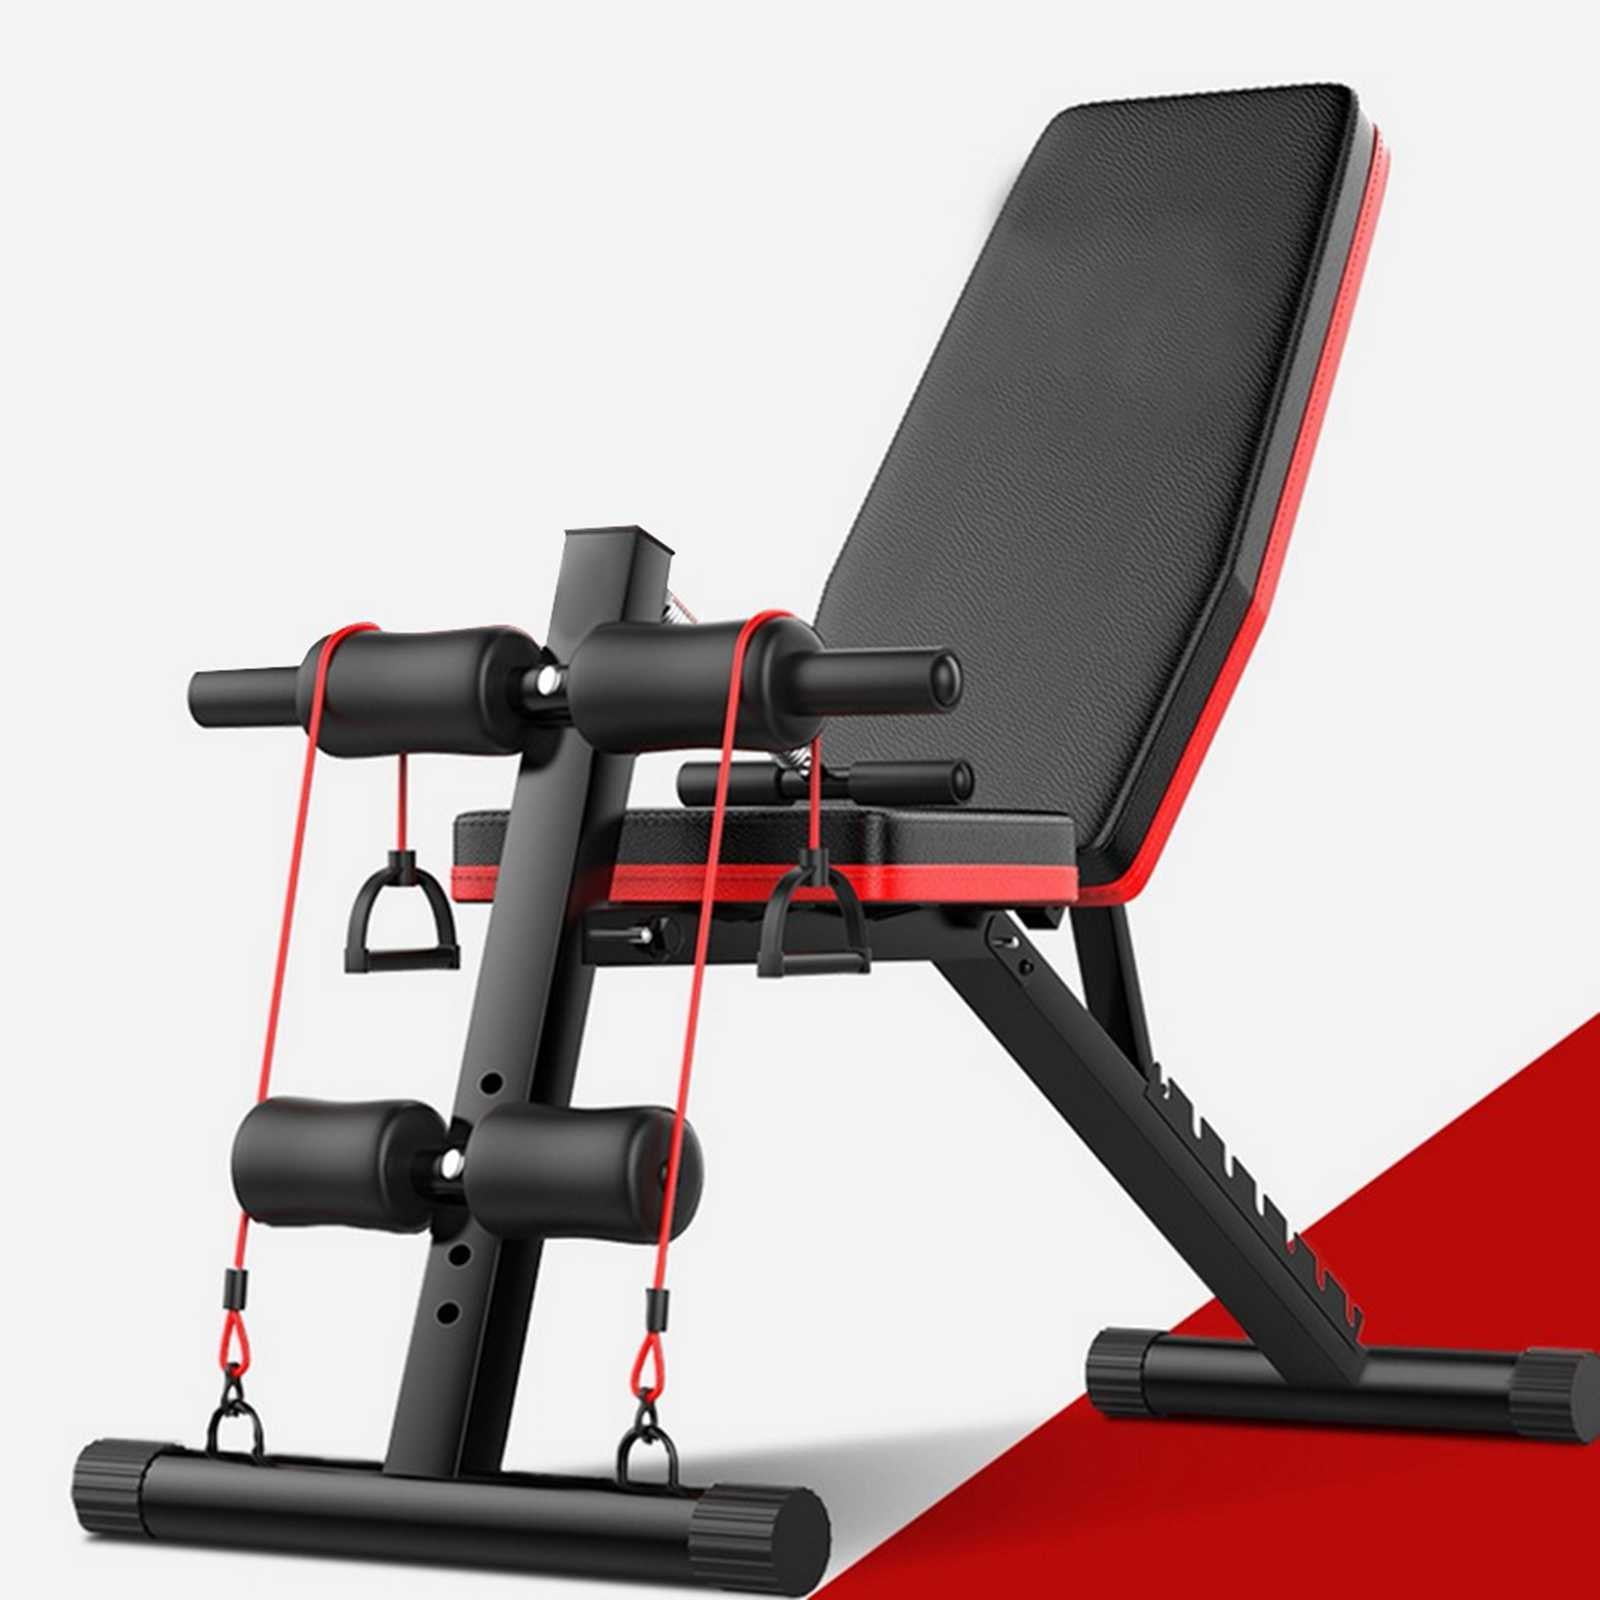 Core Strength Training Bench for Full Body Decline Ab Bench Press for Home GYMAX Weight Bench Adjustable Workout Bench Sit Up Bench with 9-Level Incline 